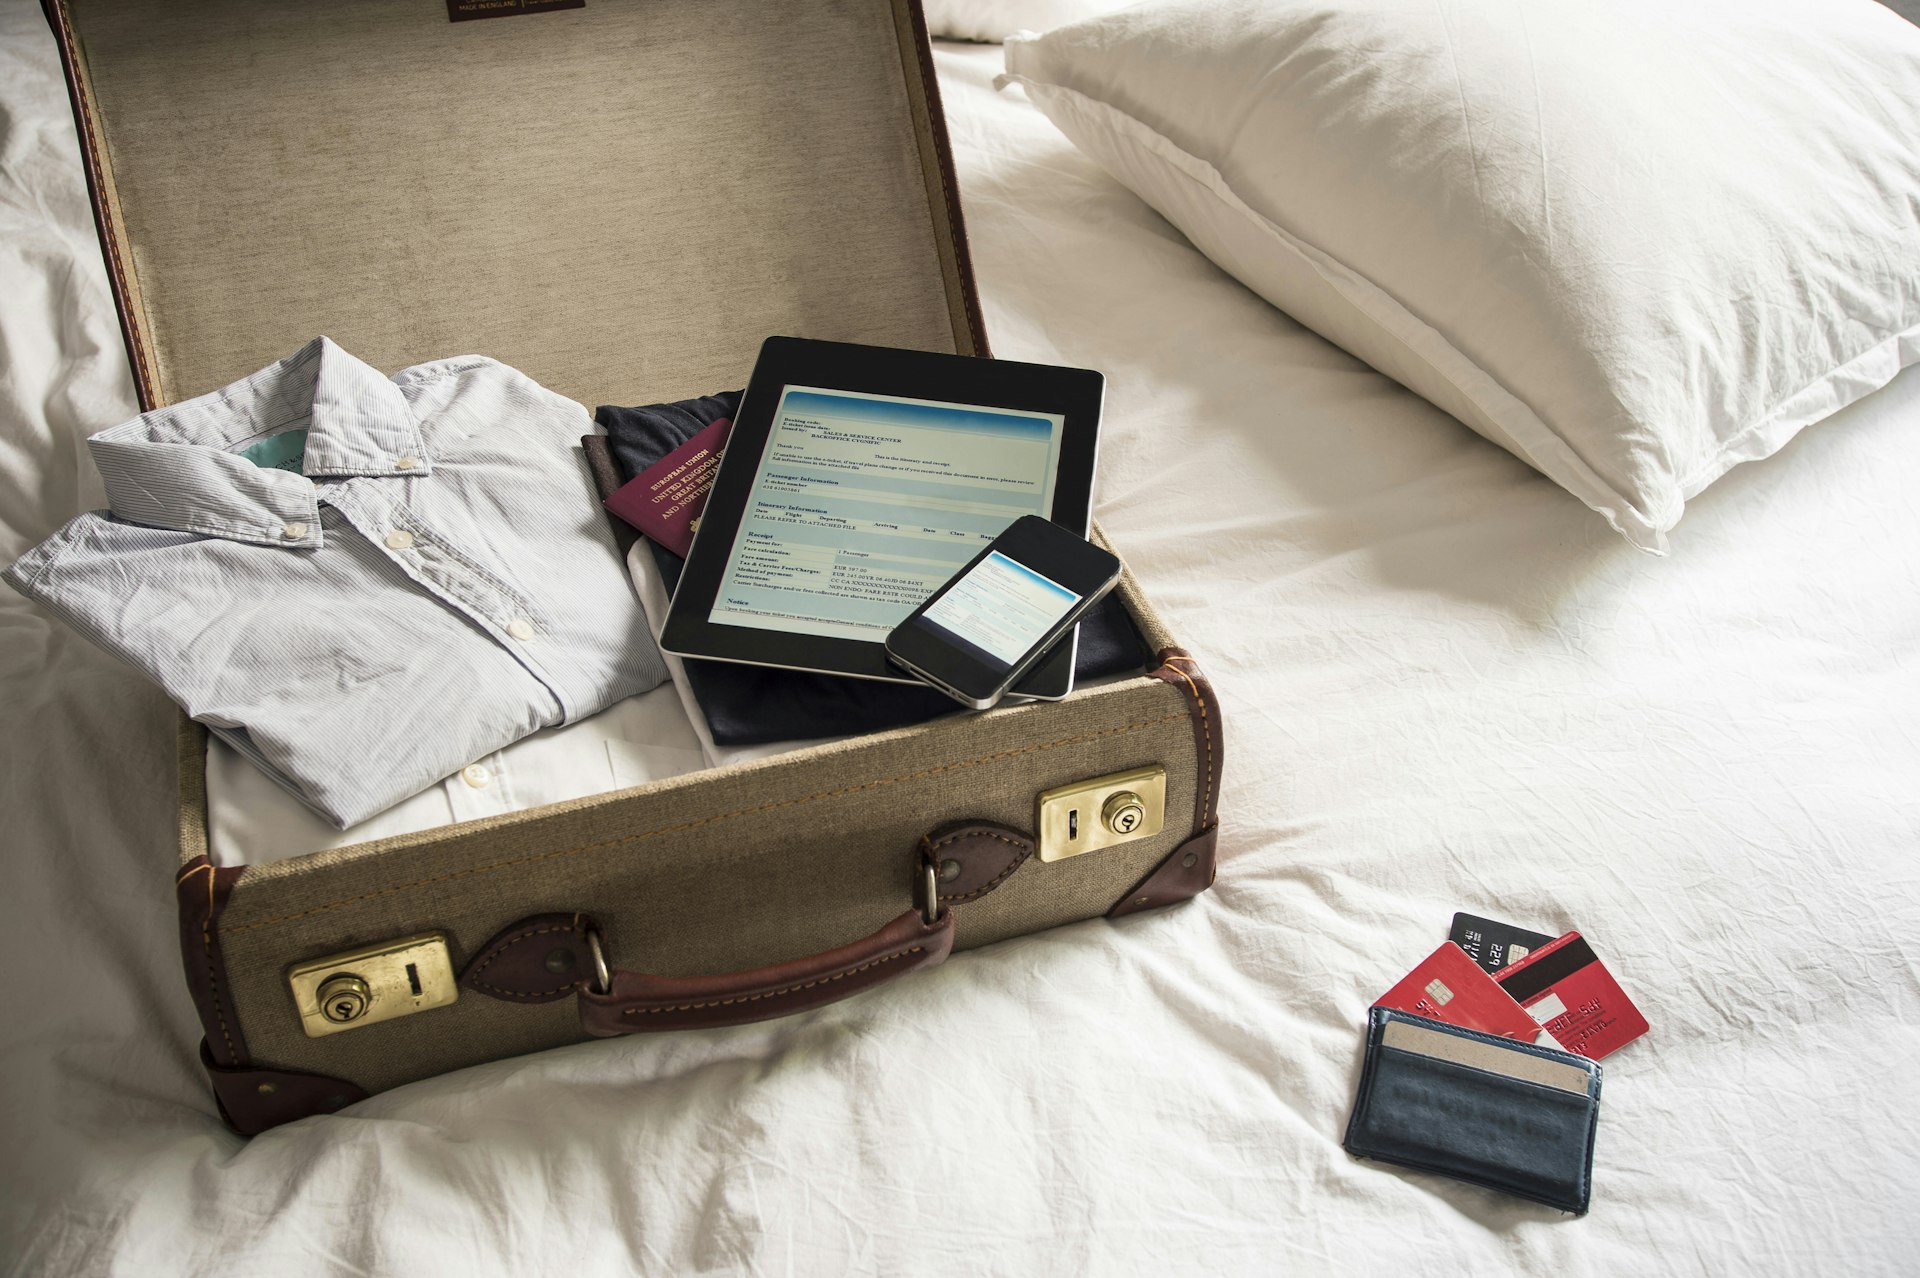 Open suitcase on bed with digital tablet and mobile phone